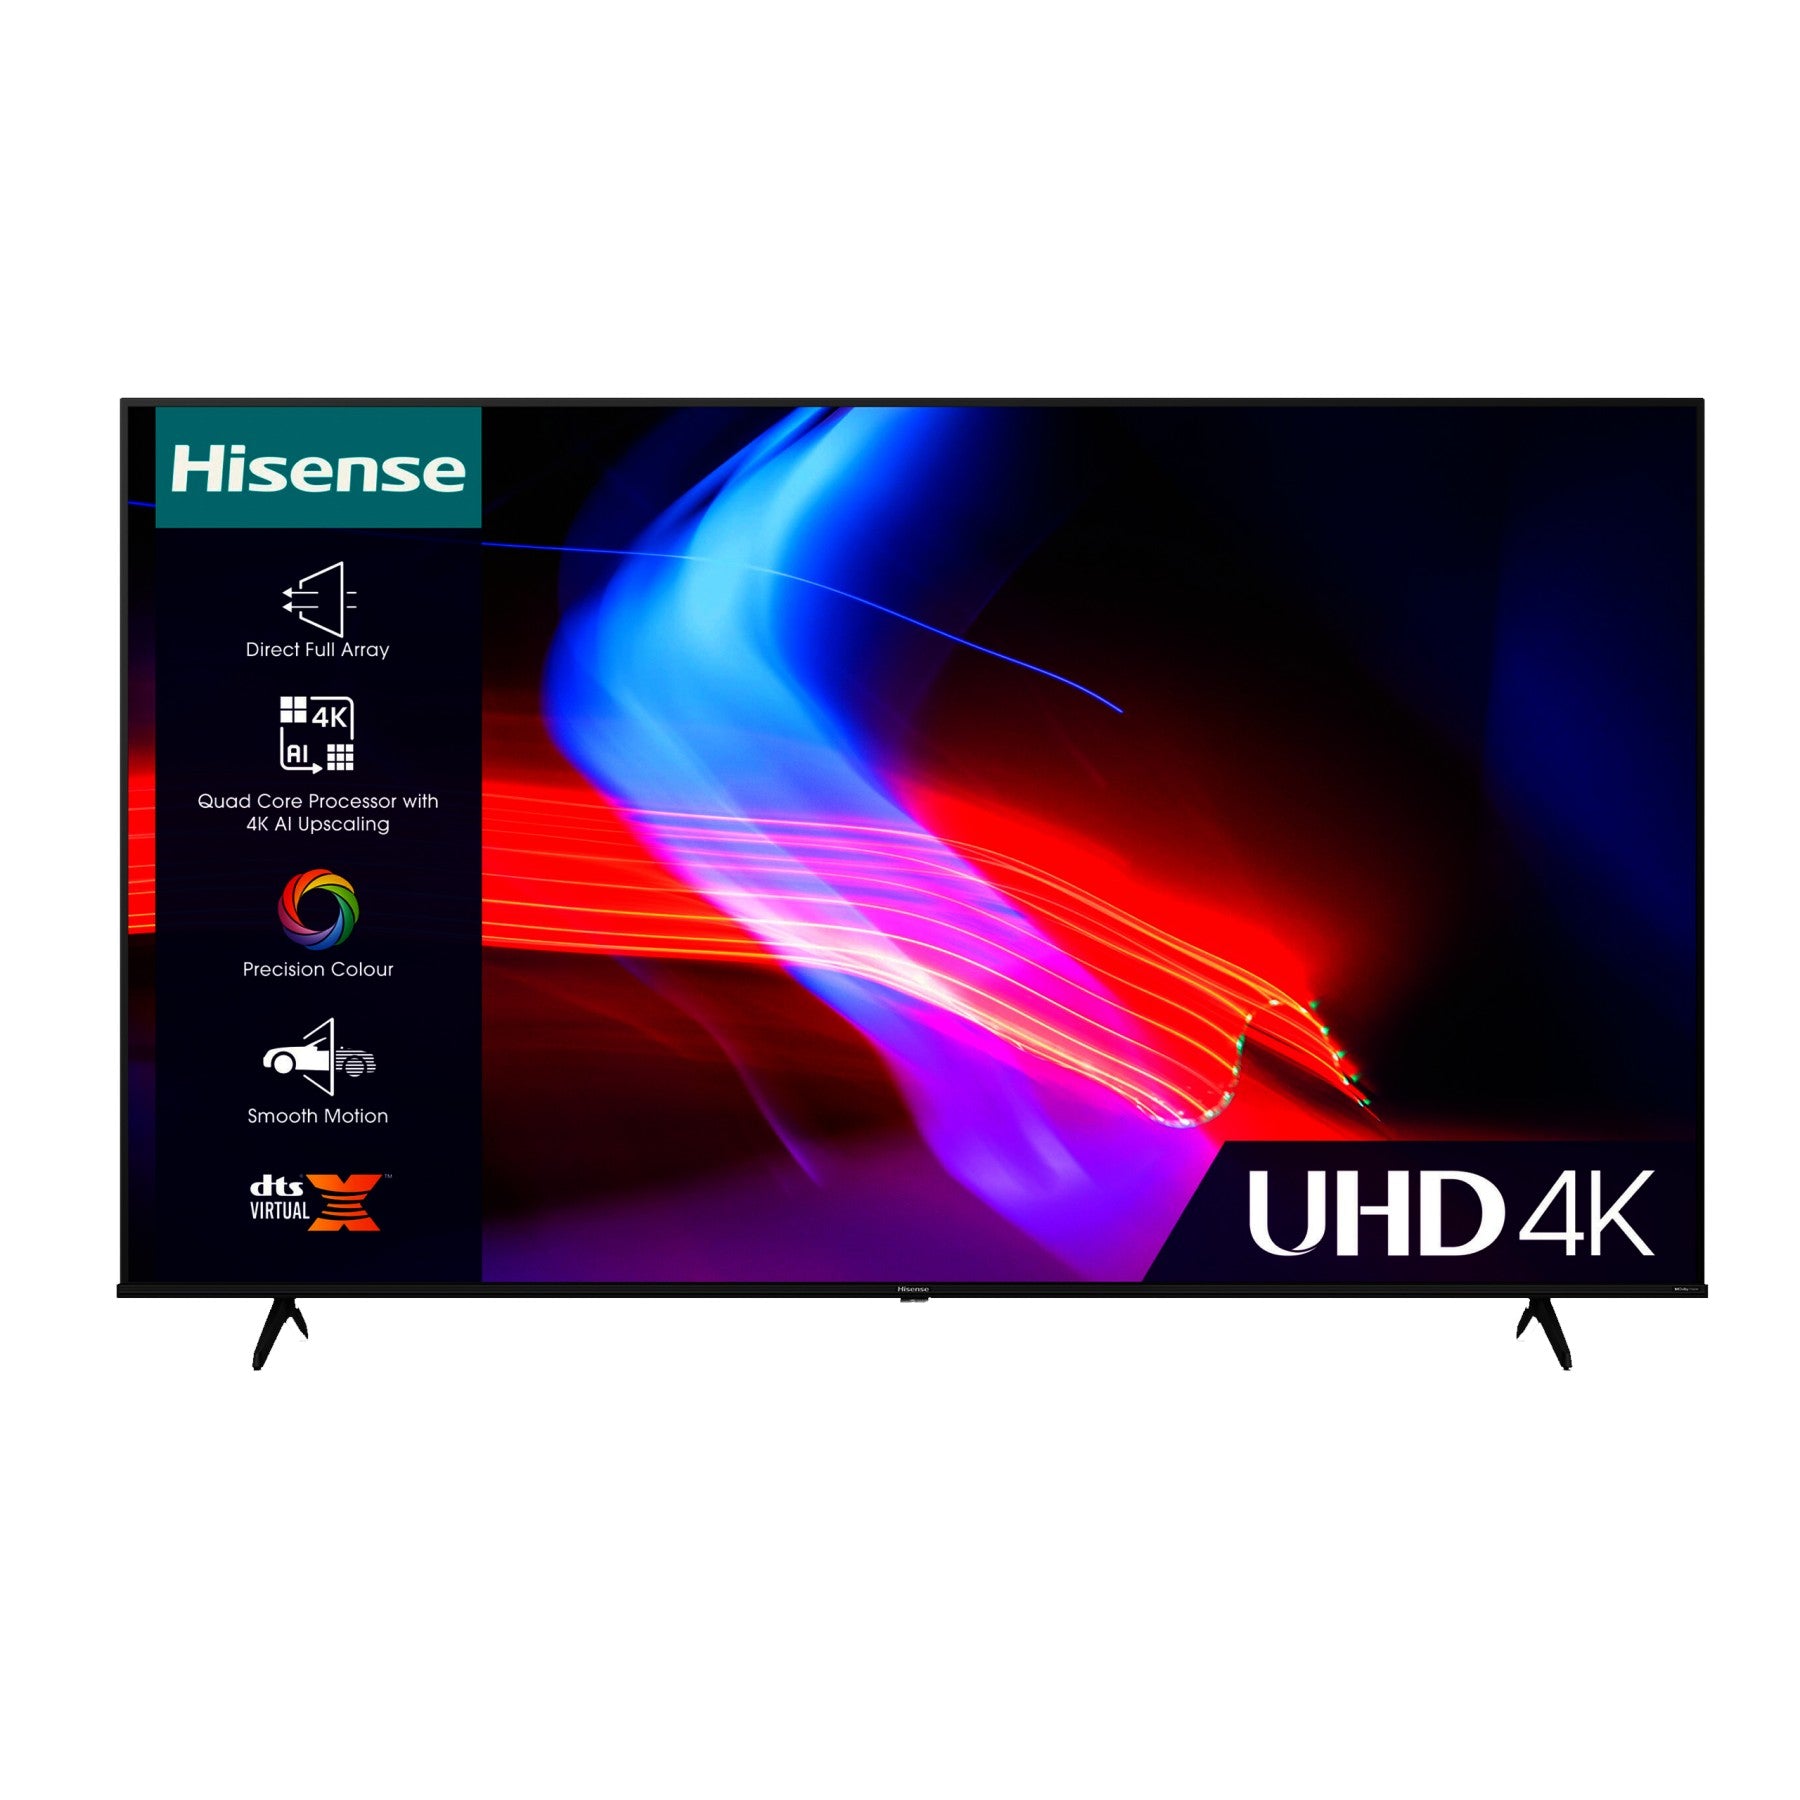 Hisense 50 Inches 4k Smart UHD Television with Bluetooth, Netflix,YouTube app| TV 50 A6K